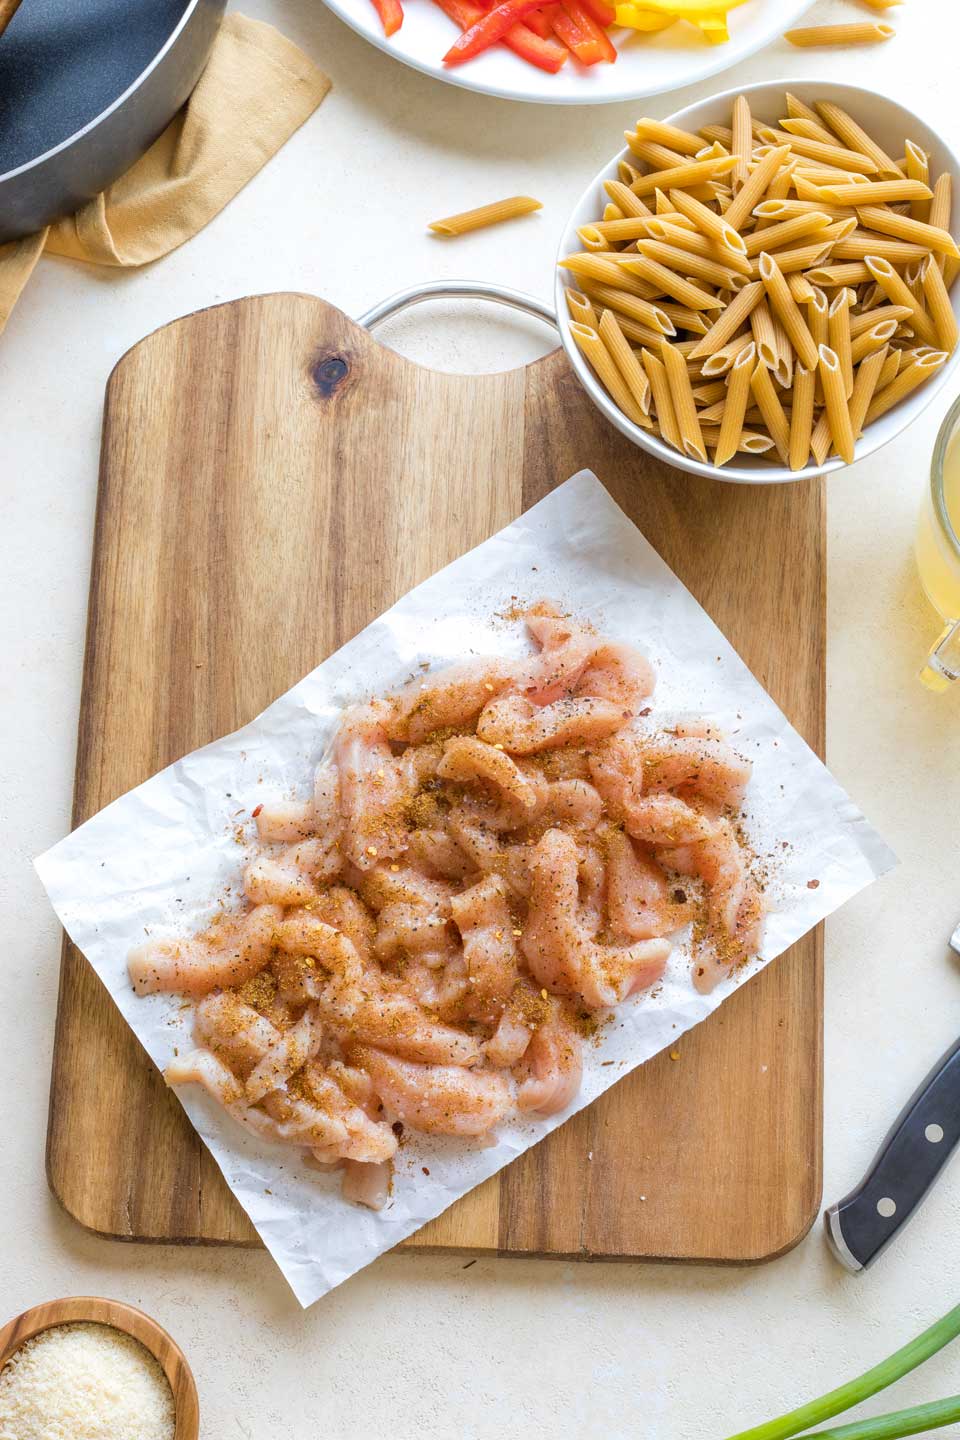 Overhead of chicken strips tossed with jerk seasonings on wooden board with bowl of uncooked pasta.